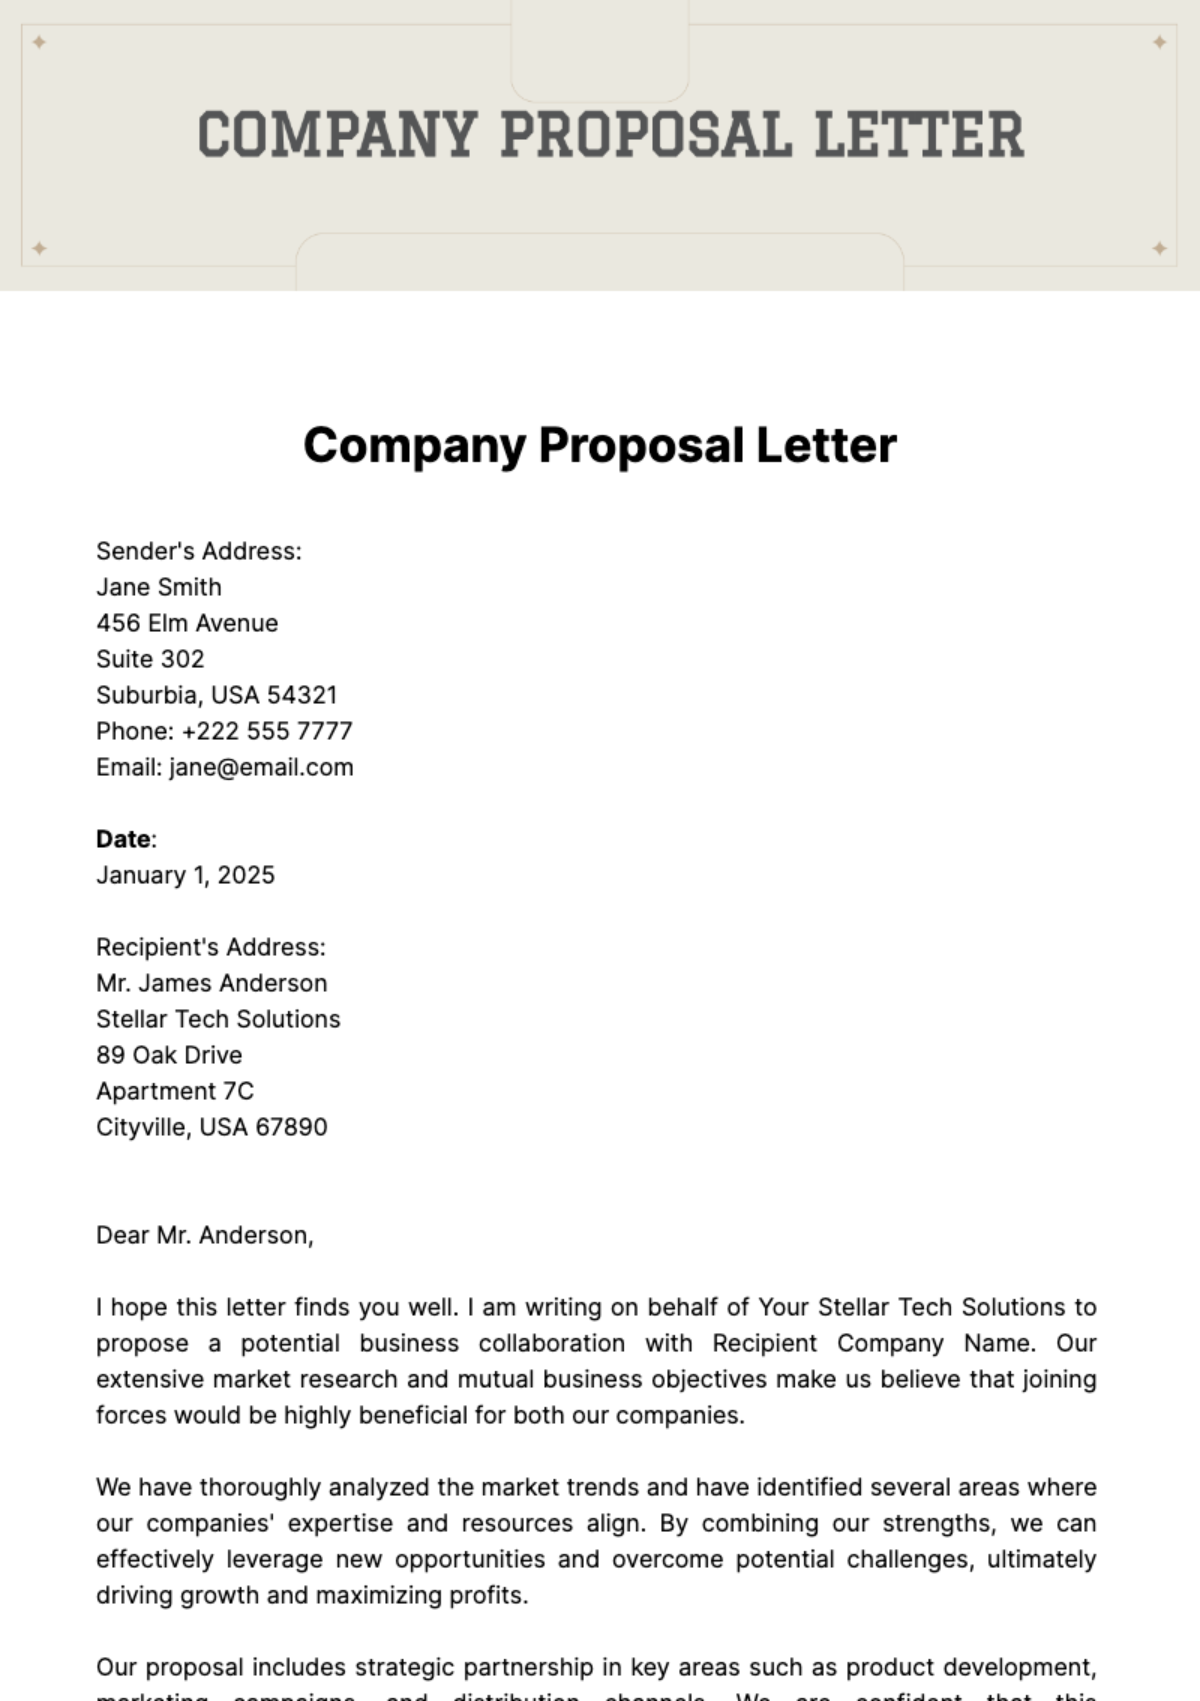 Company Proposal Letter Template